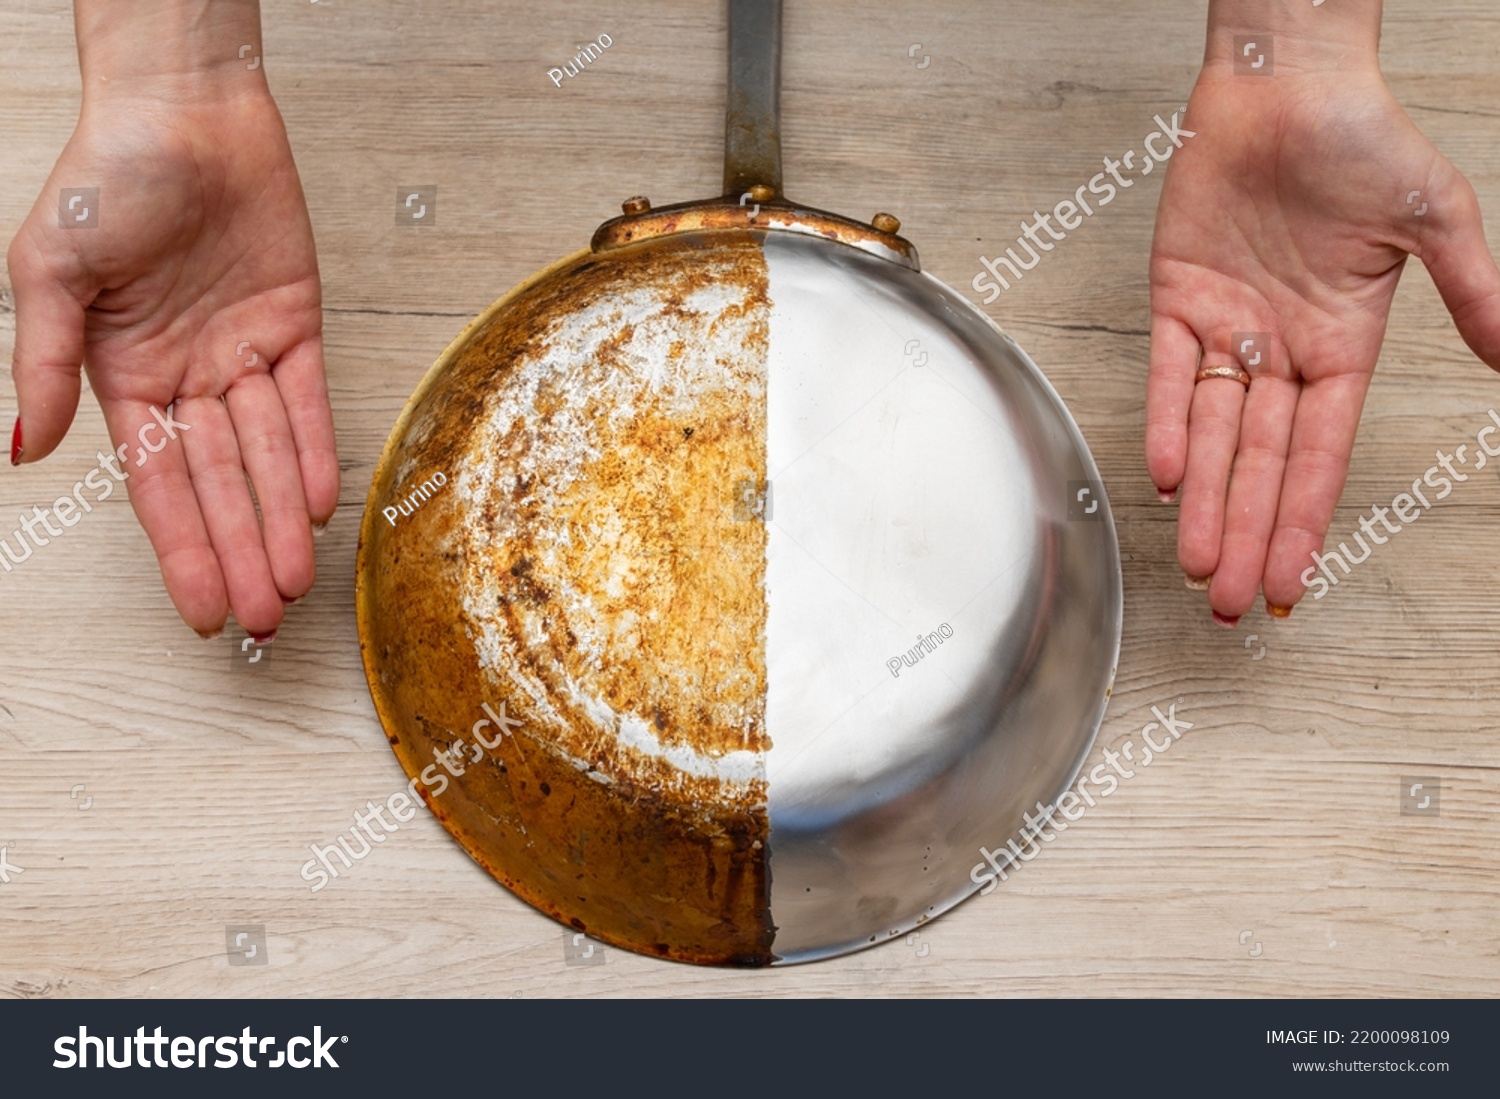 A woman's hand presenting a frying pan that is half burnt and half polished #2200098109